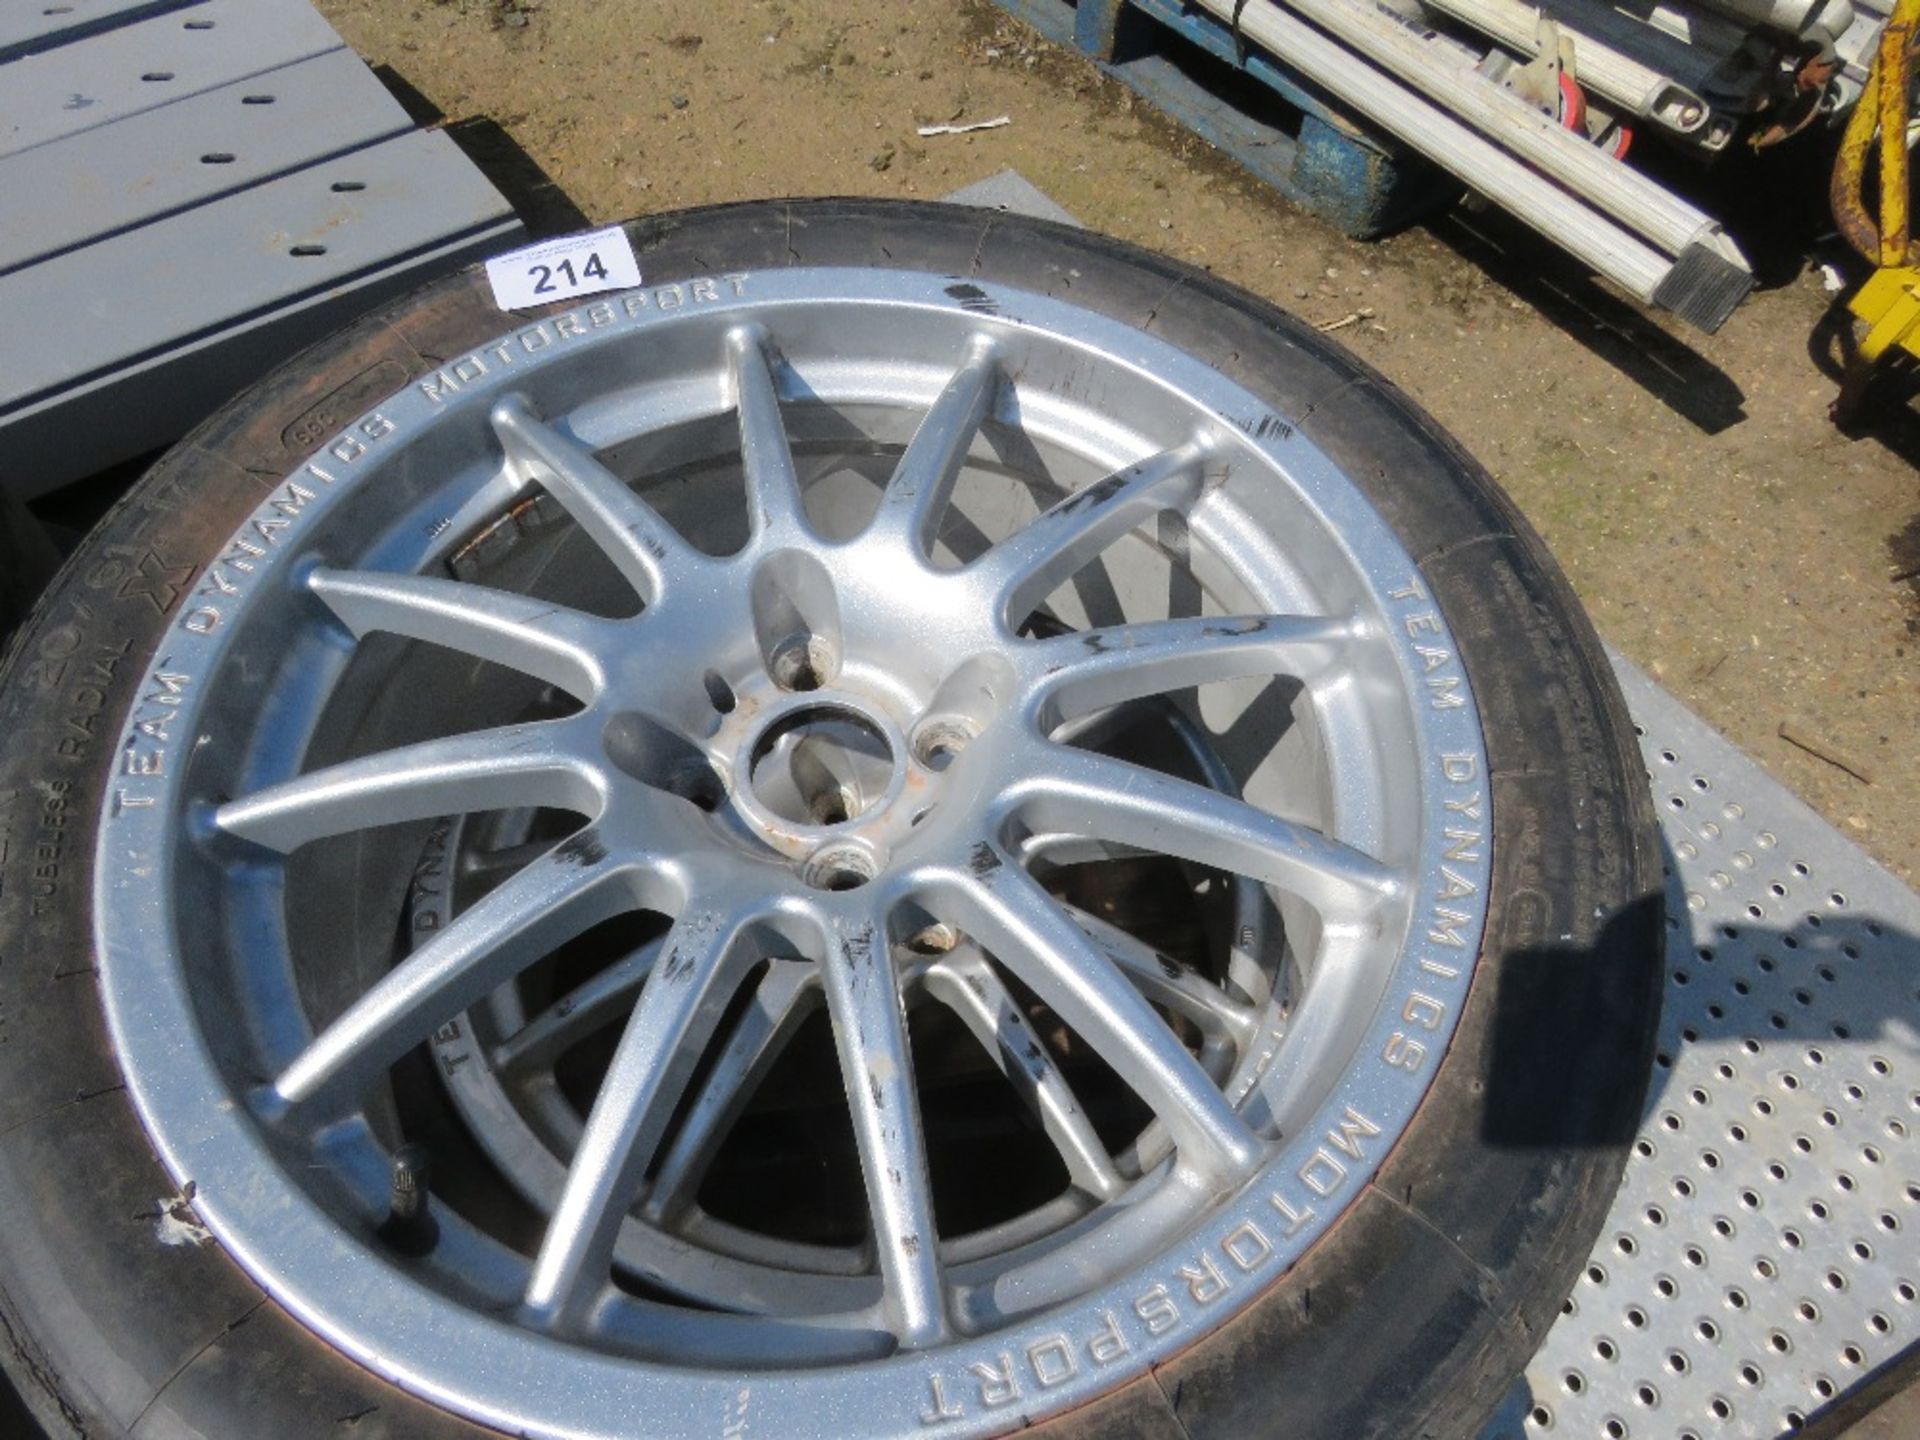 SET OF 4NO TEAM DYNAMICS MOTORSPORT RACING WHEELS AND TYRES, PREVIOUSLY USED ON AN ALFA ROMEO 33 RA - Image 2 of 4